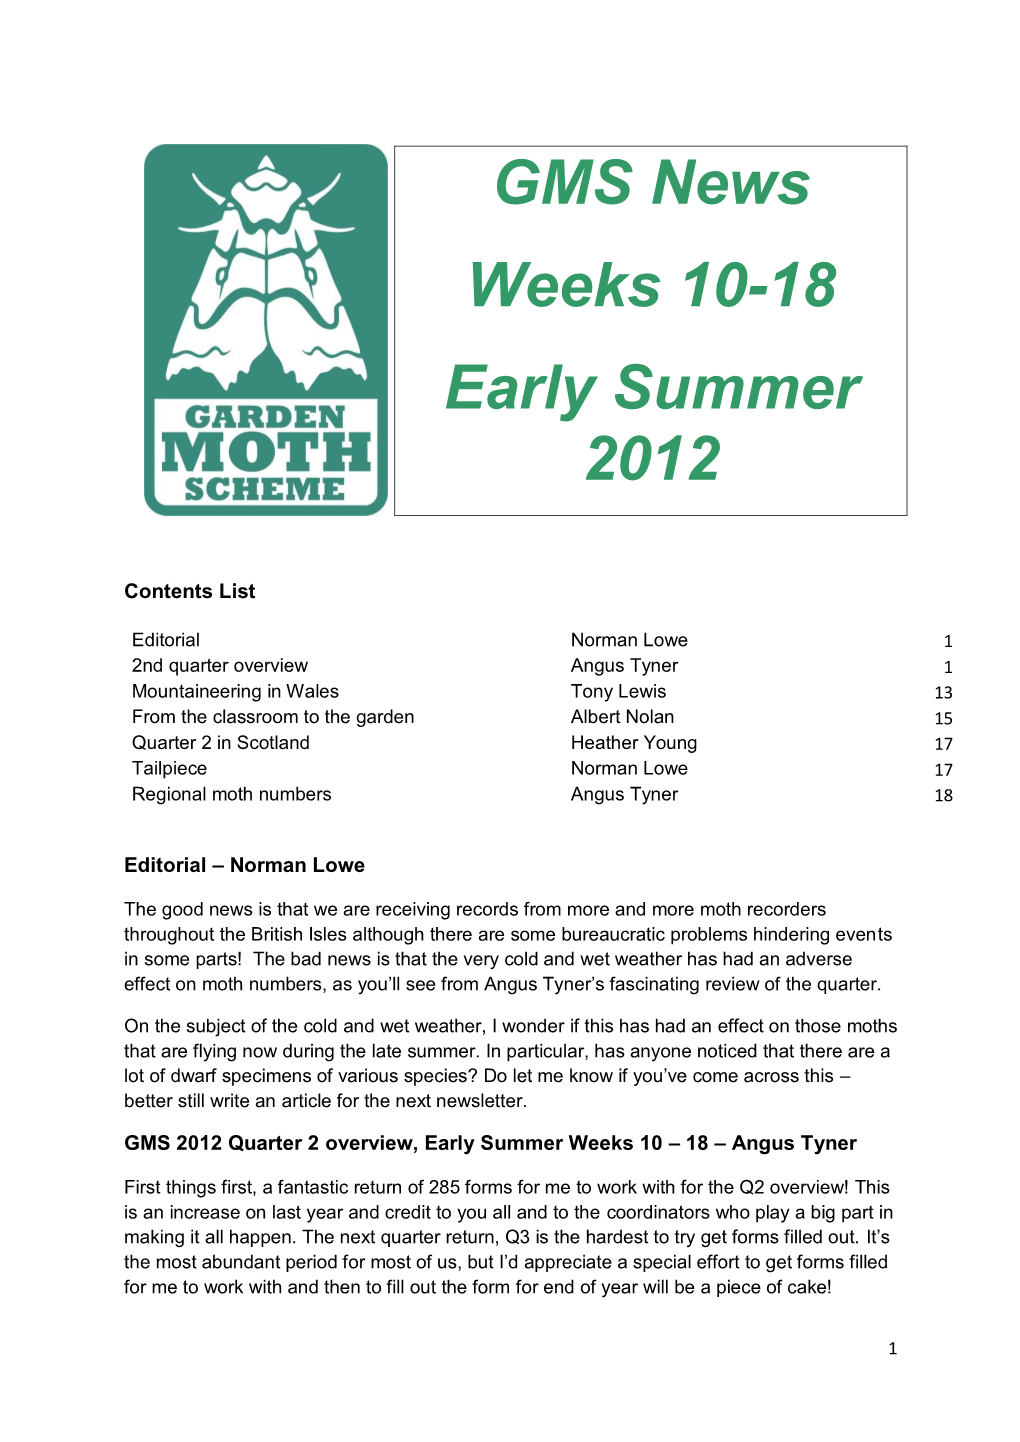 GMS News Weeks 10-18 Early Summer 2012